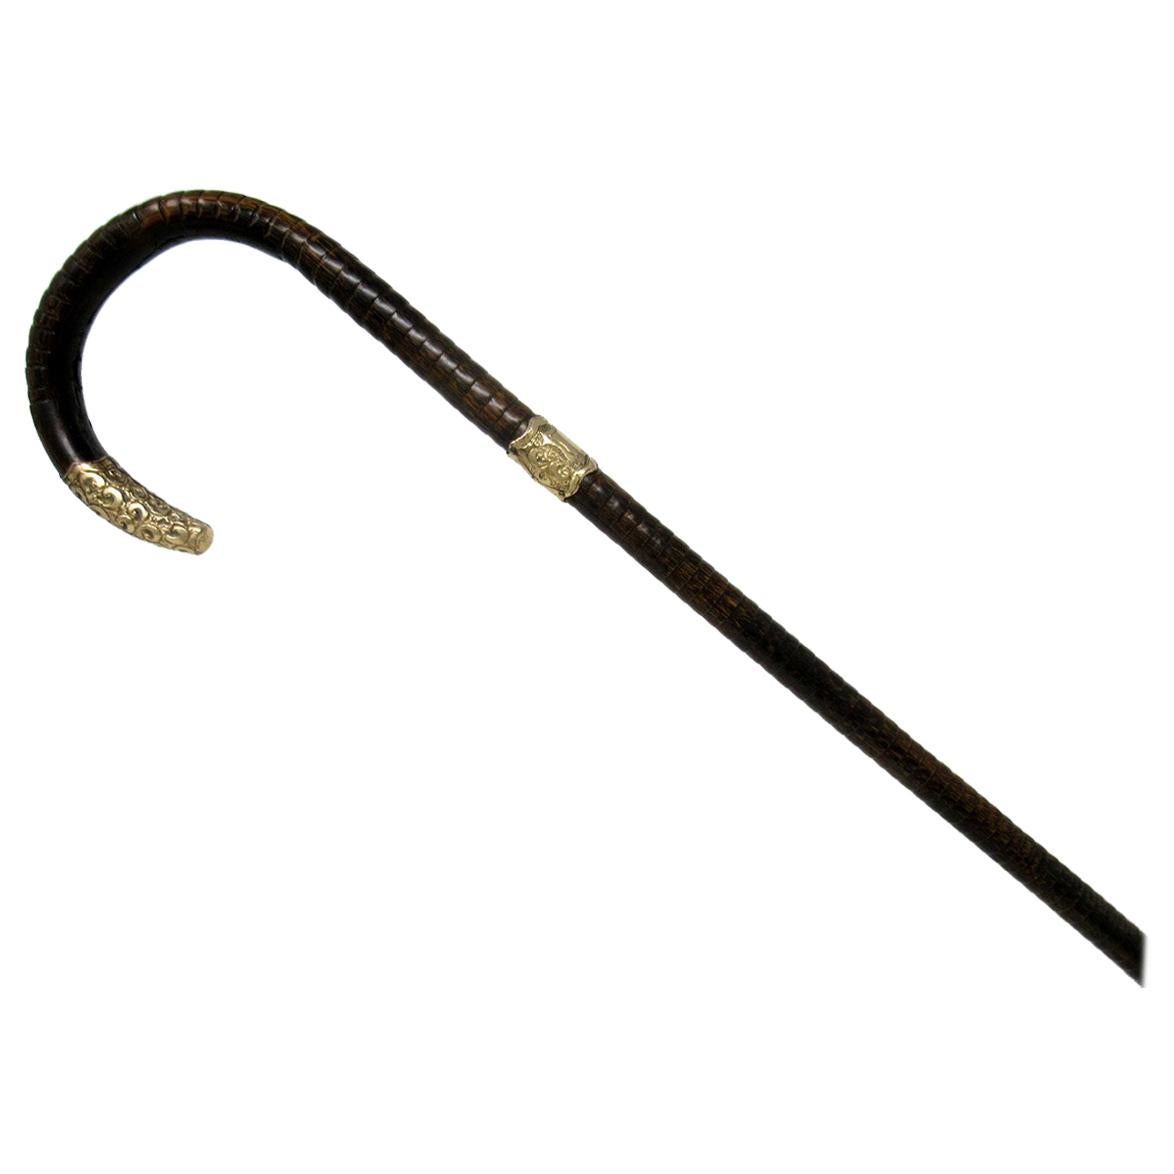 Fine quality polished stepped partridge wood traditional crook handled ladies or gentleman’s walking cane with highly decorative embossed eighteen carat gold-plated mount and matching collar with a shield shaped cartouche, last quarter of the 19th